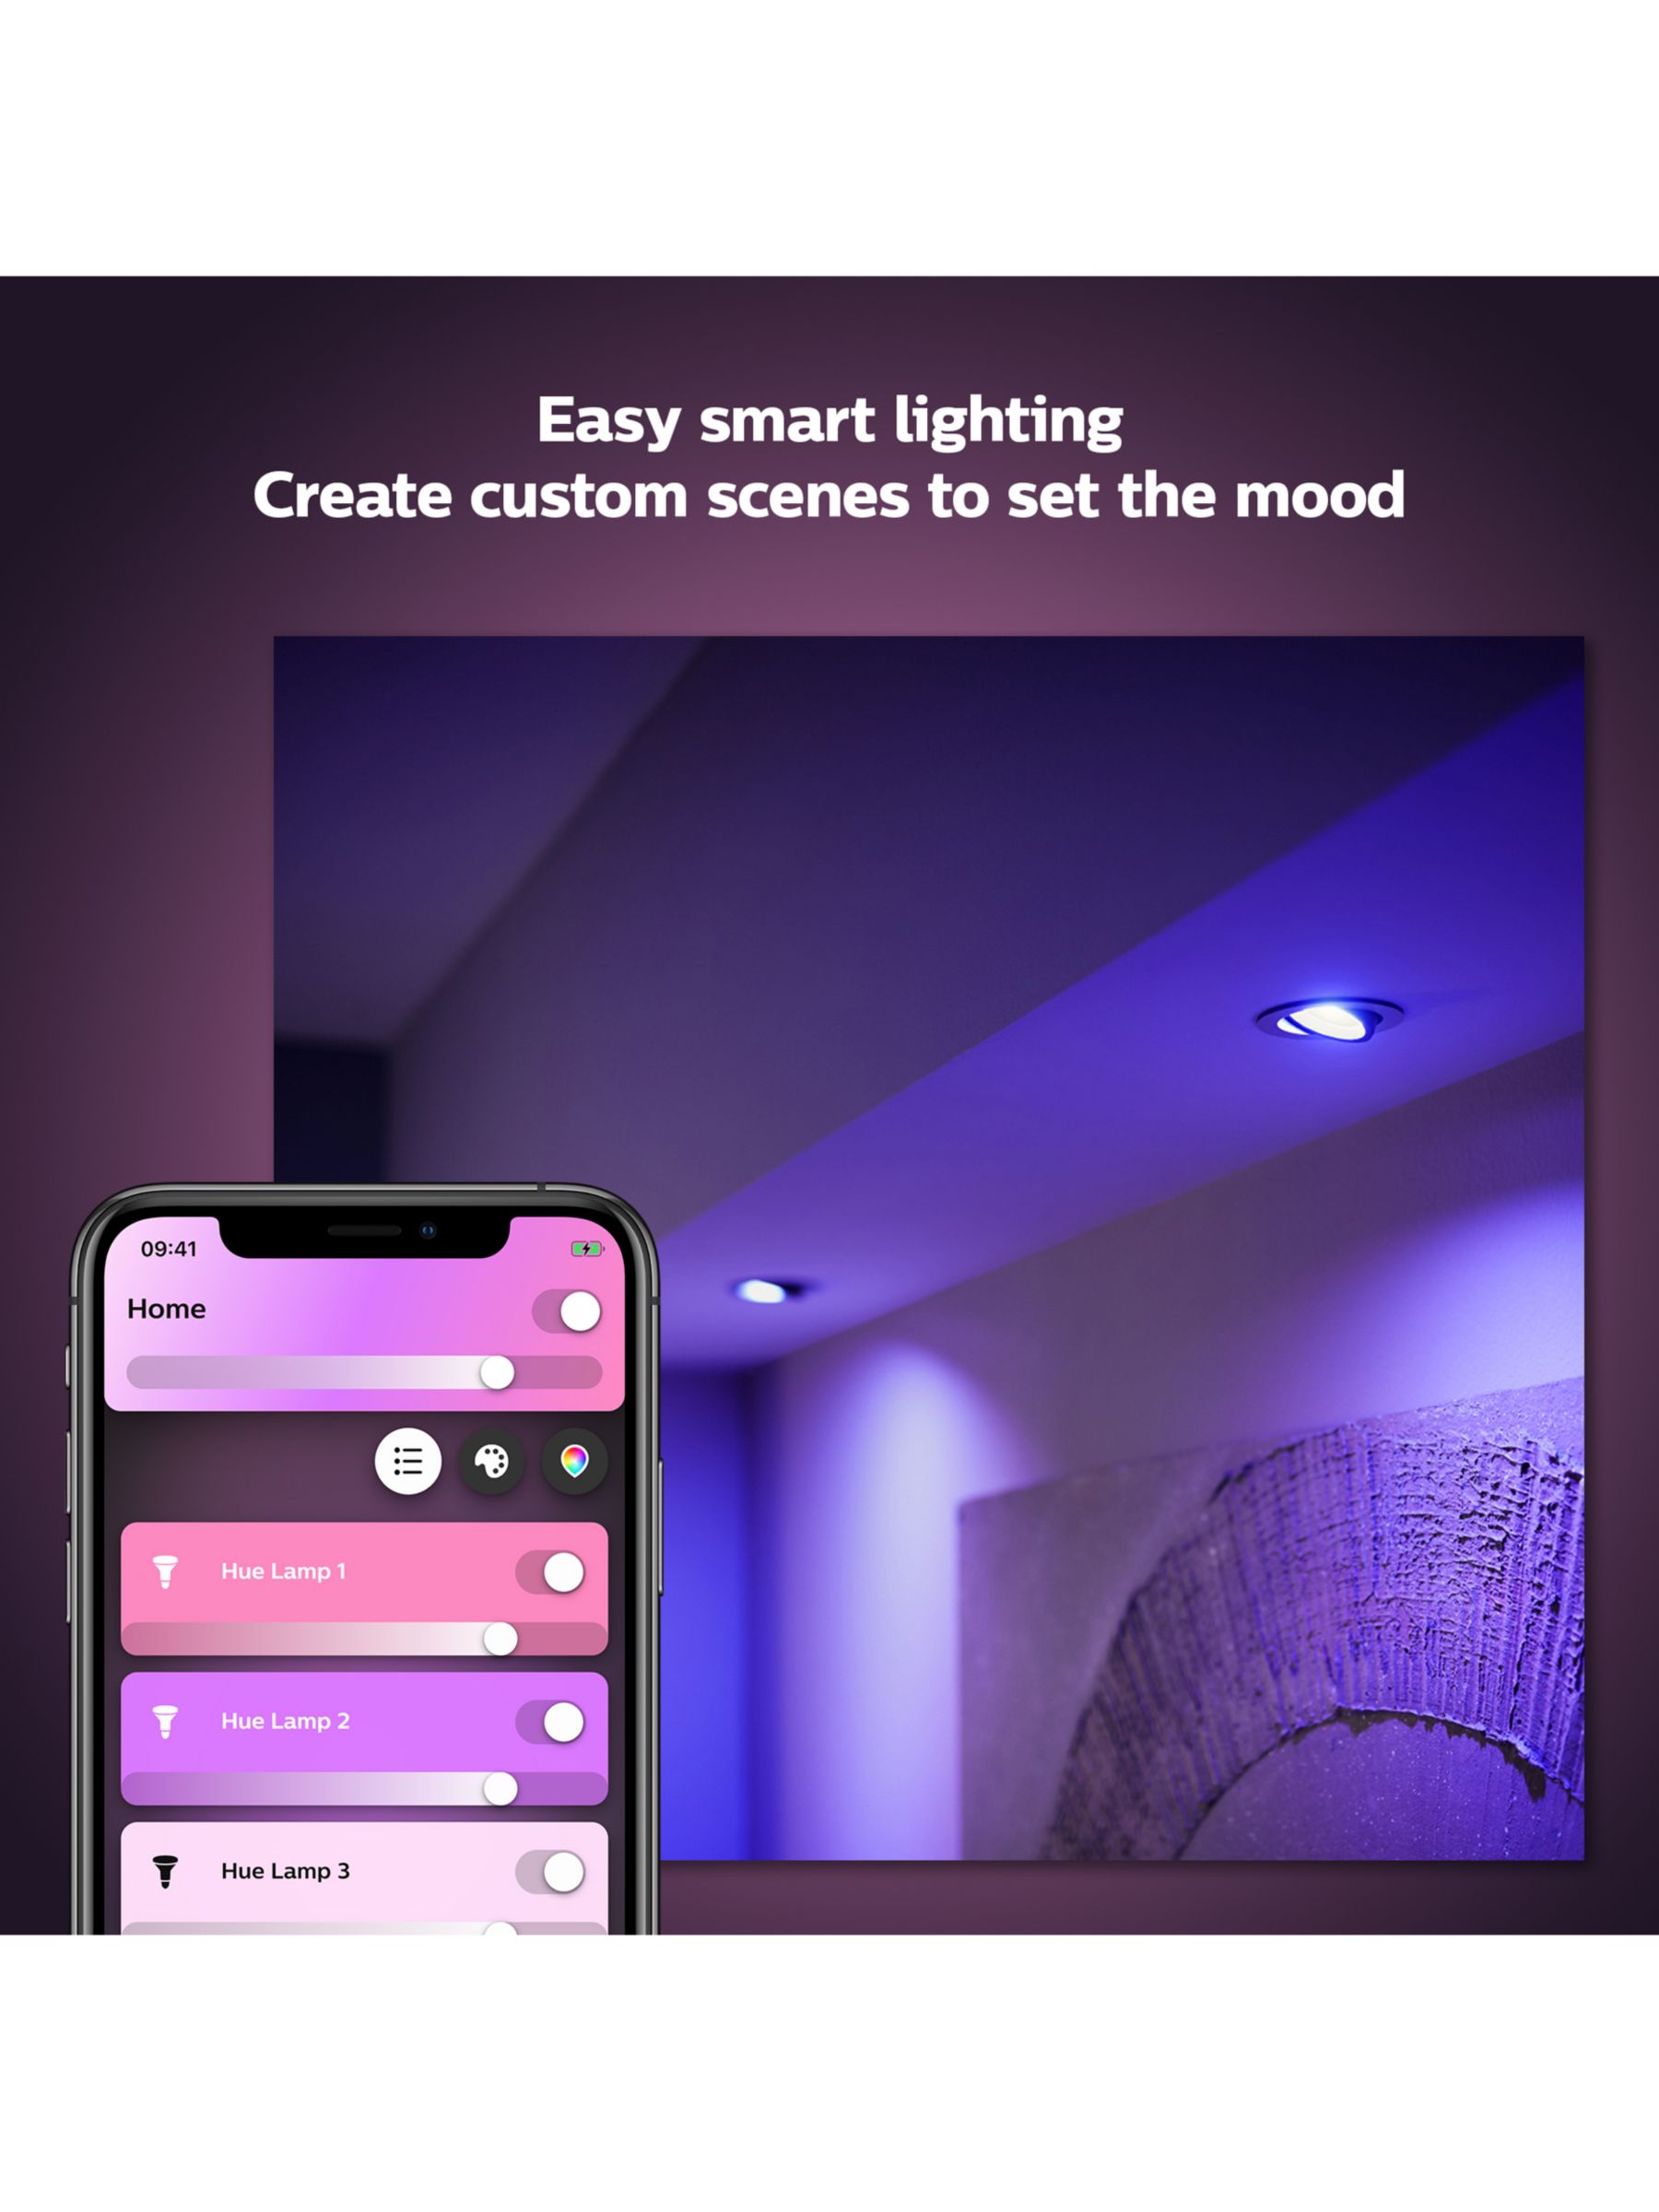 Philips Hue - PHILIPS Hue Wireless Dimming Kit avec ampoule LED